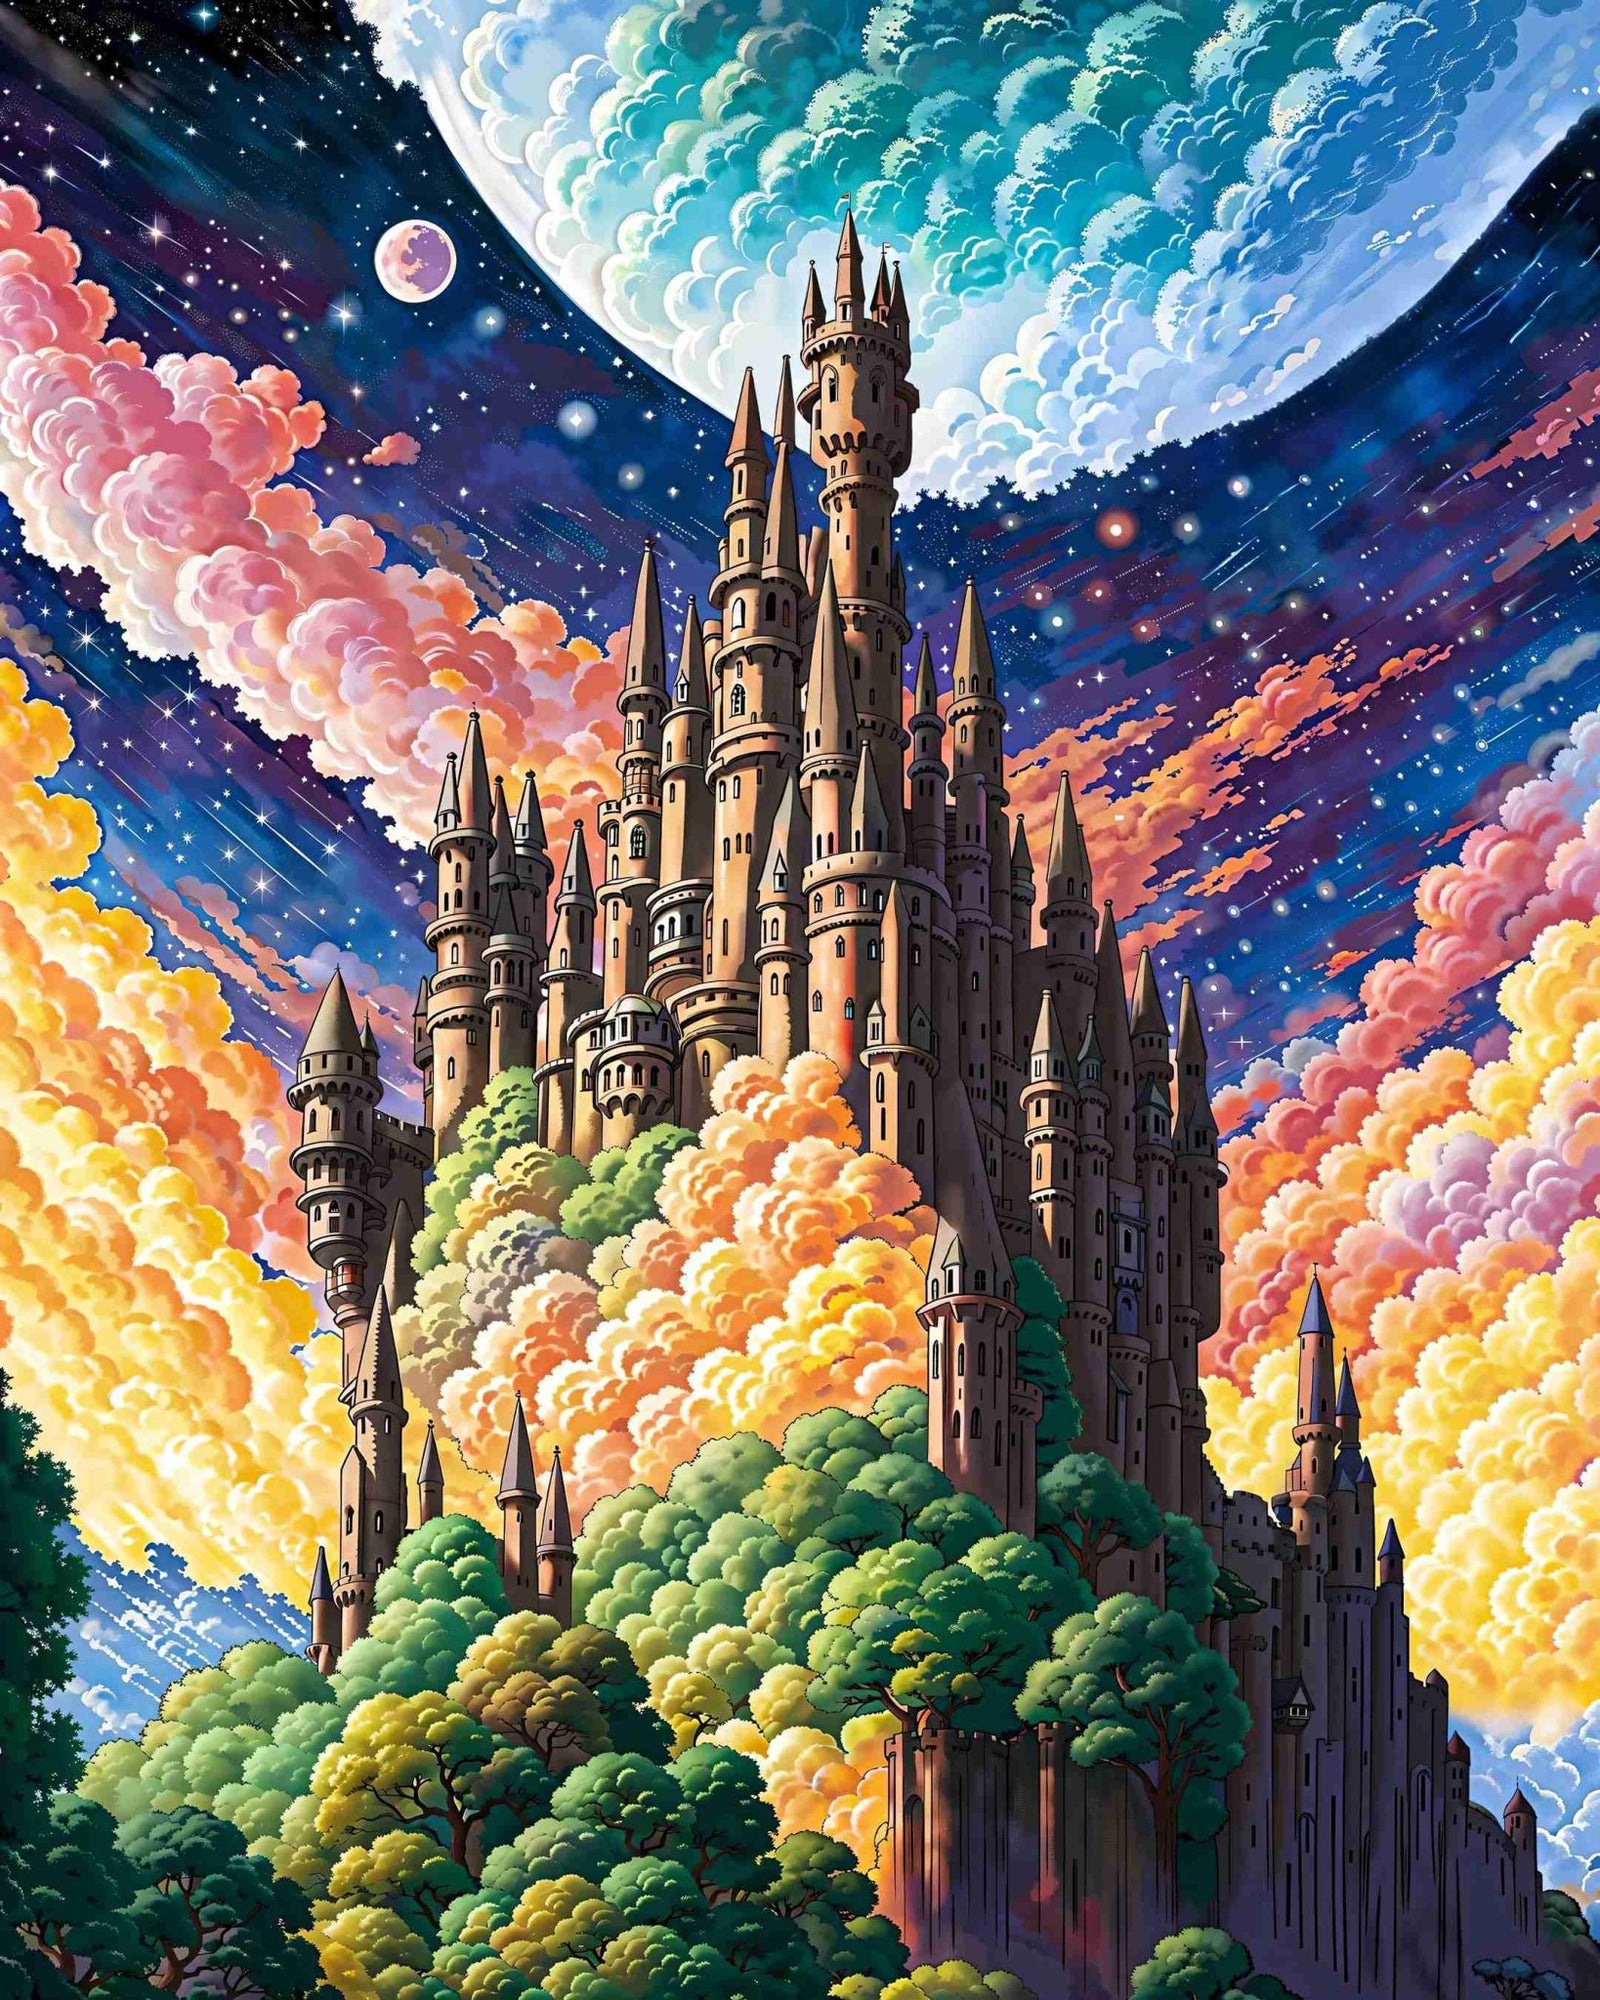 Dream stronghold - Poster - Ever colorful